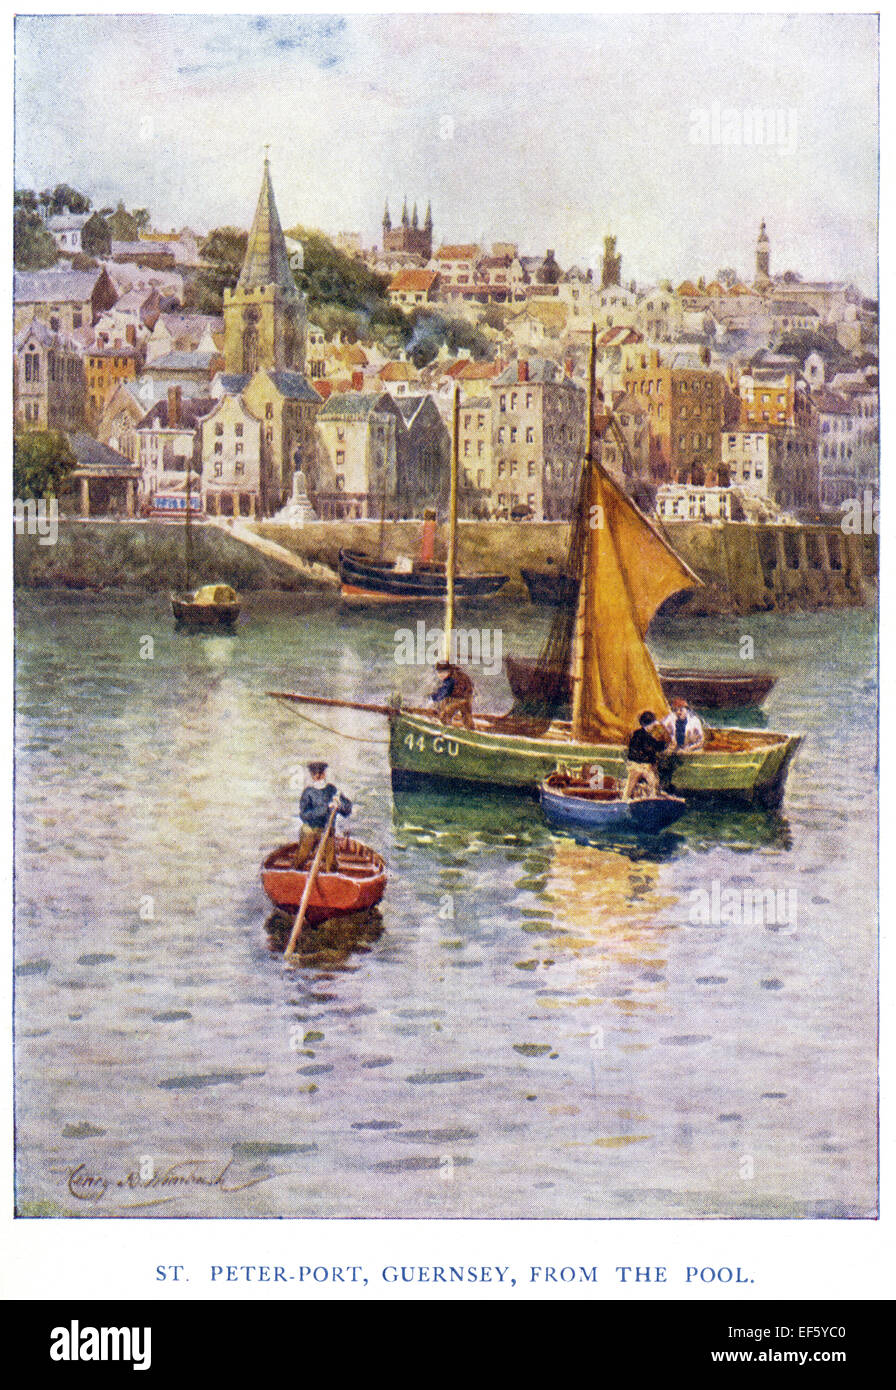 A coloured picture 'St. Peter Port, Guernsey, from the Pool' scanned at high resolution from a book published in 1920. Stock Photo